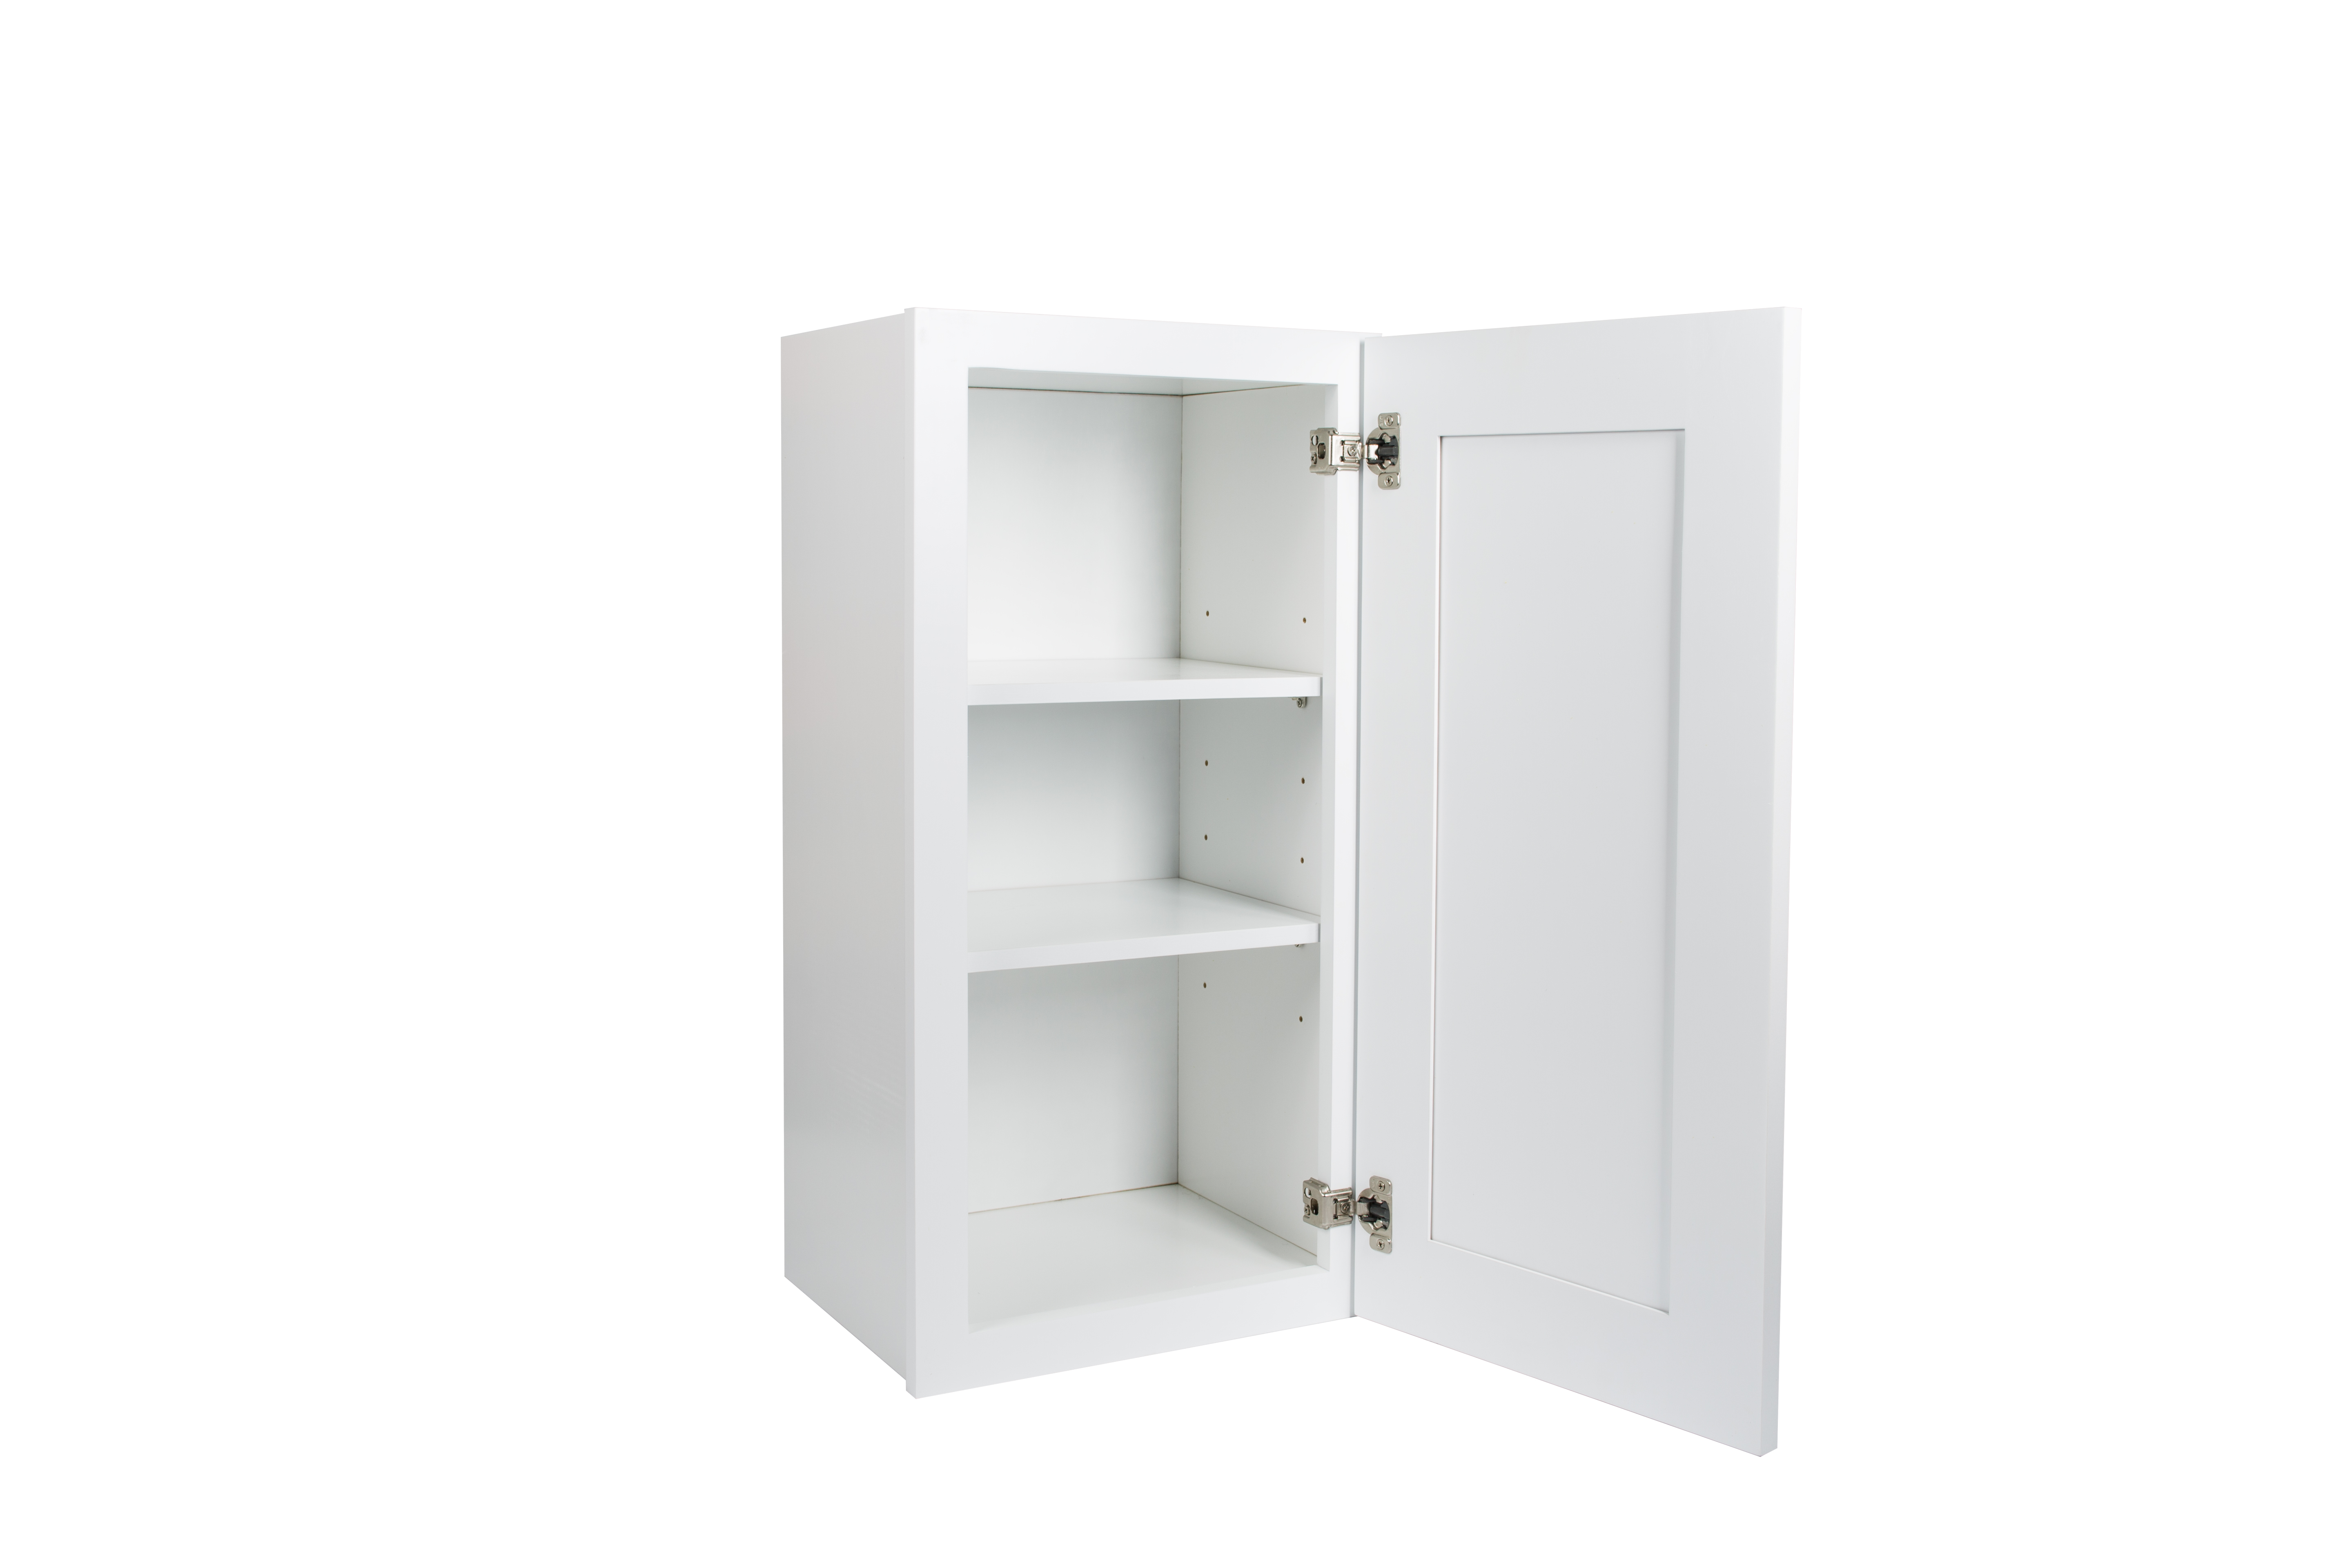 Ready to Assemble 21x42x12 in. Shaker Wall Cabinet with 1-Door and Adjustable Shelves in White